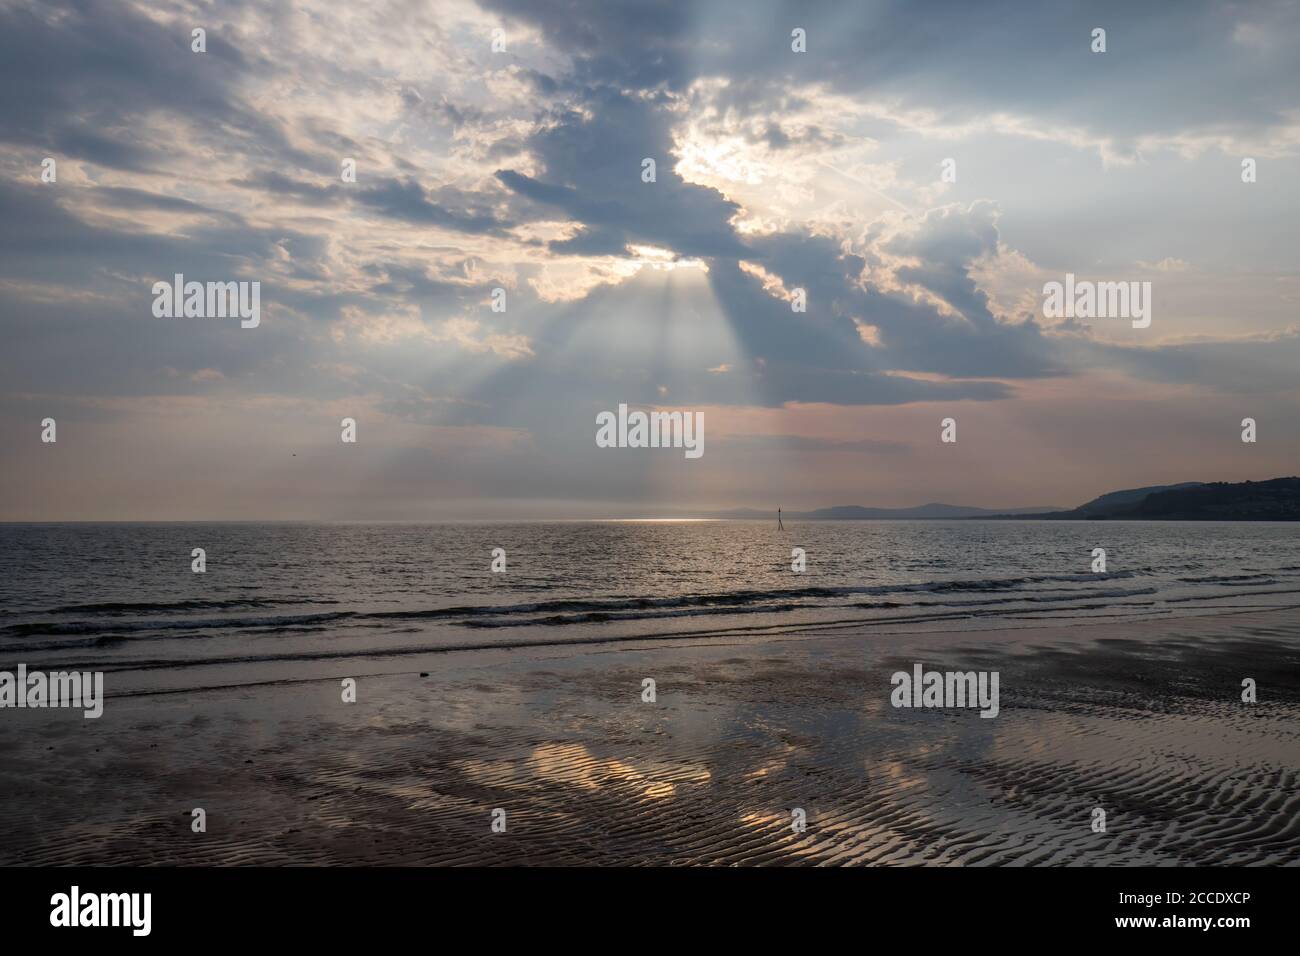 Dramatic sky with sun rays above Colwyn bay, North Wales. Dawn sunrise on the coast with a calm sea Stock Photo